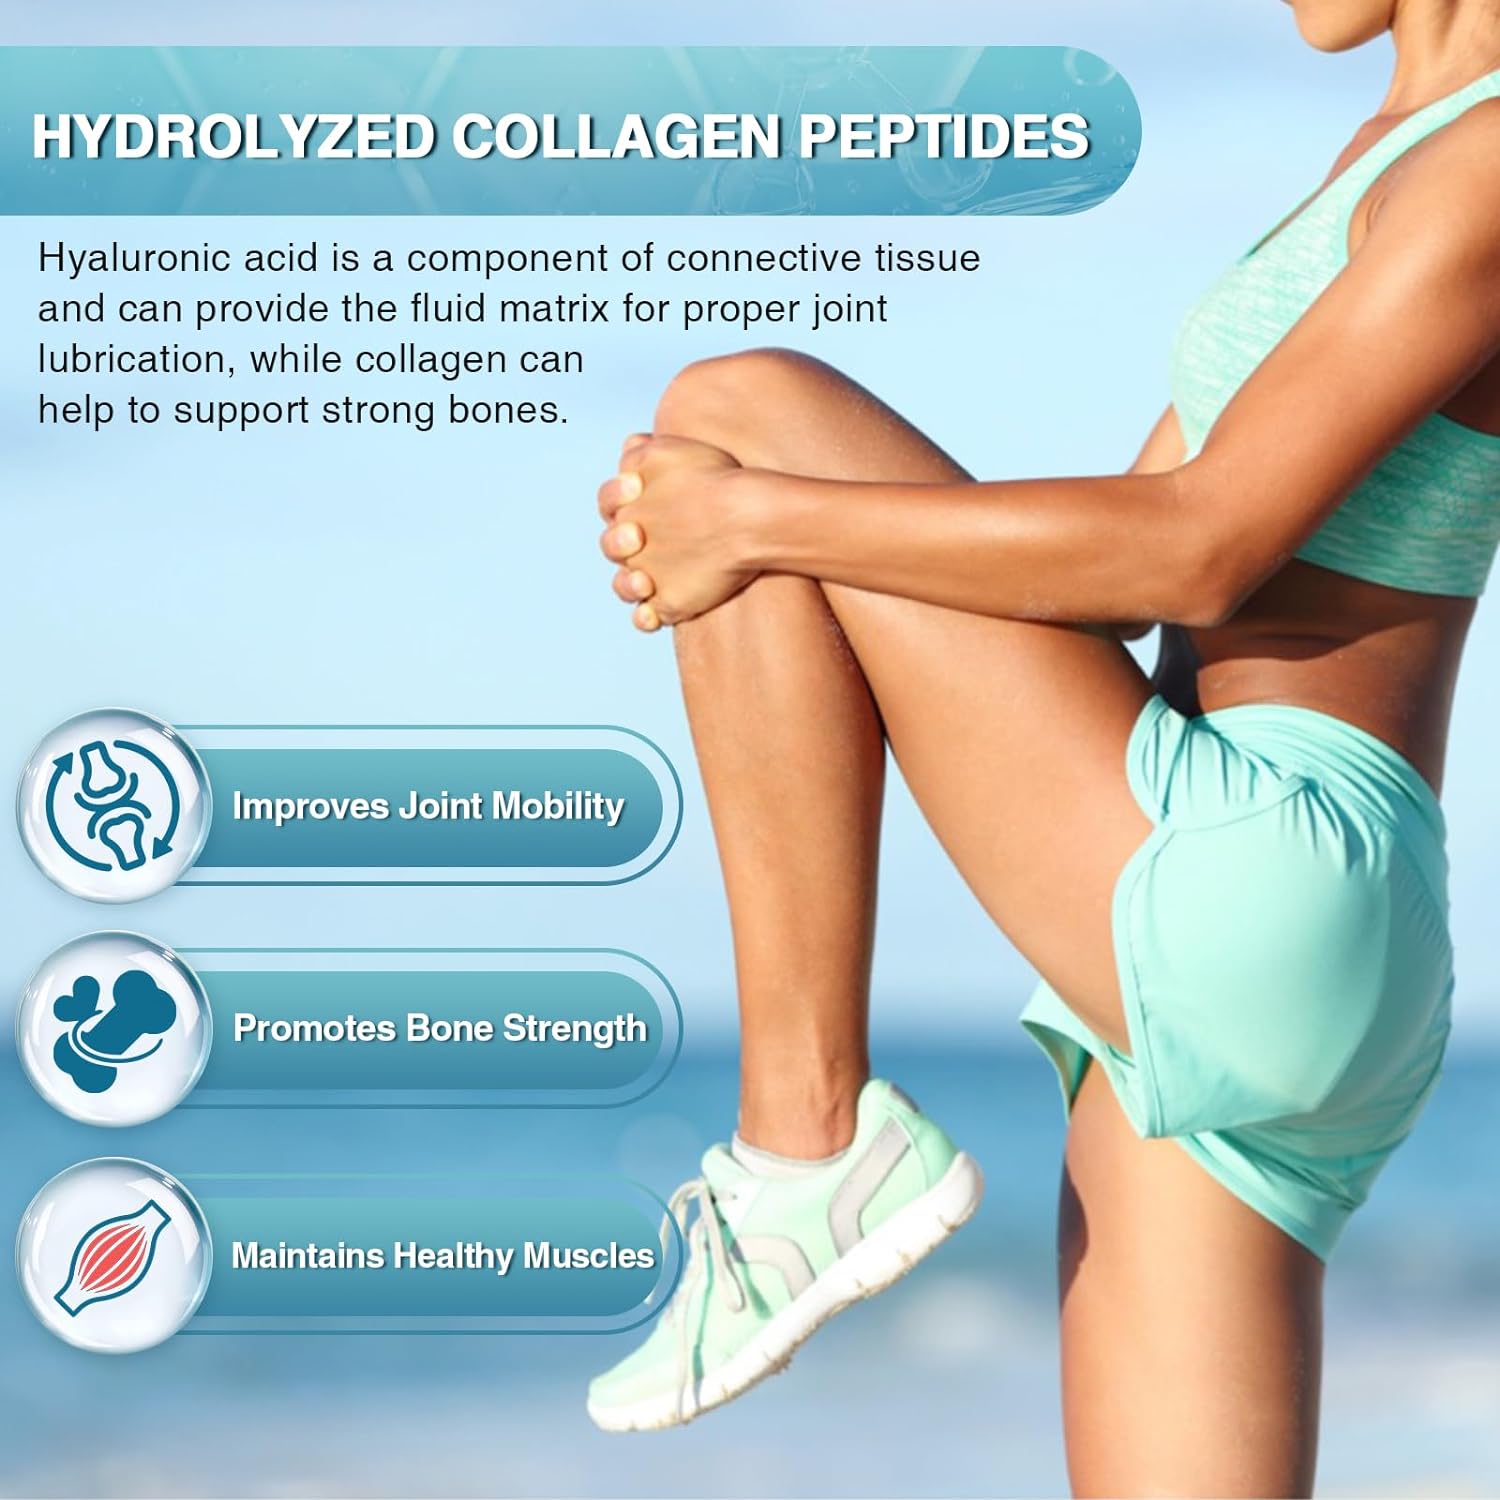 HDROLVZEDCOLLAGEN PEPTIDES strengthens joints